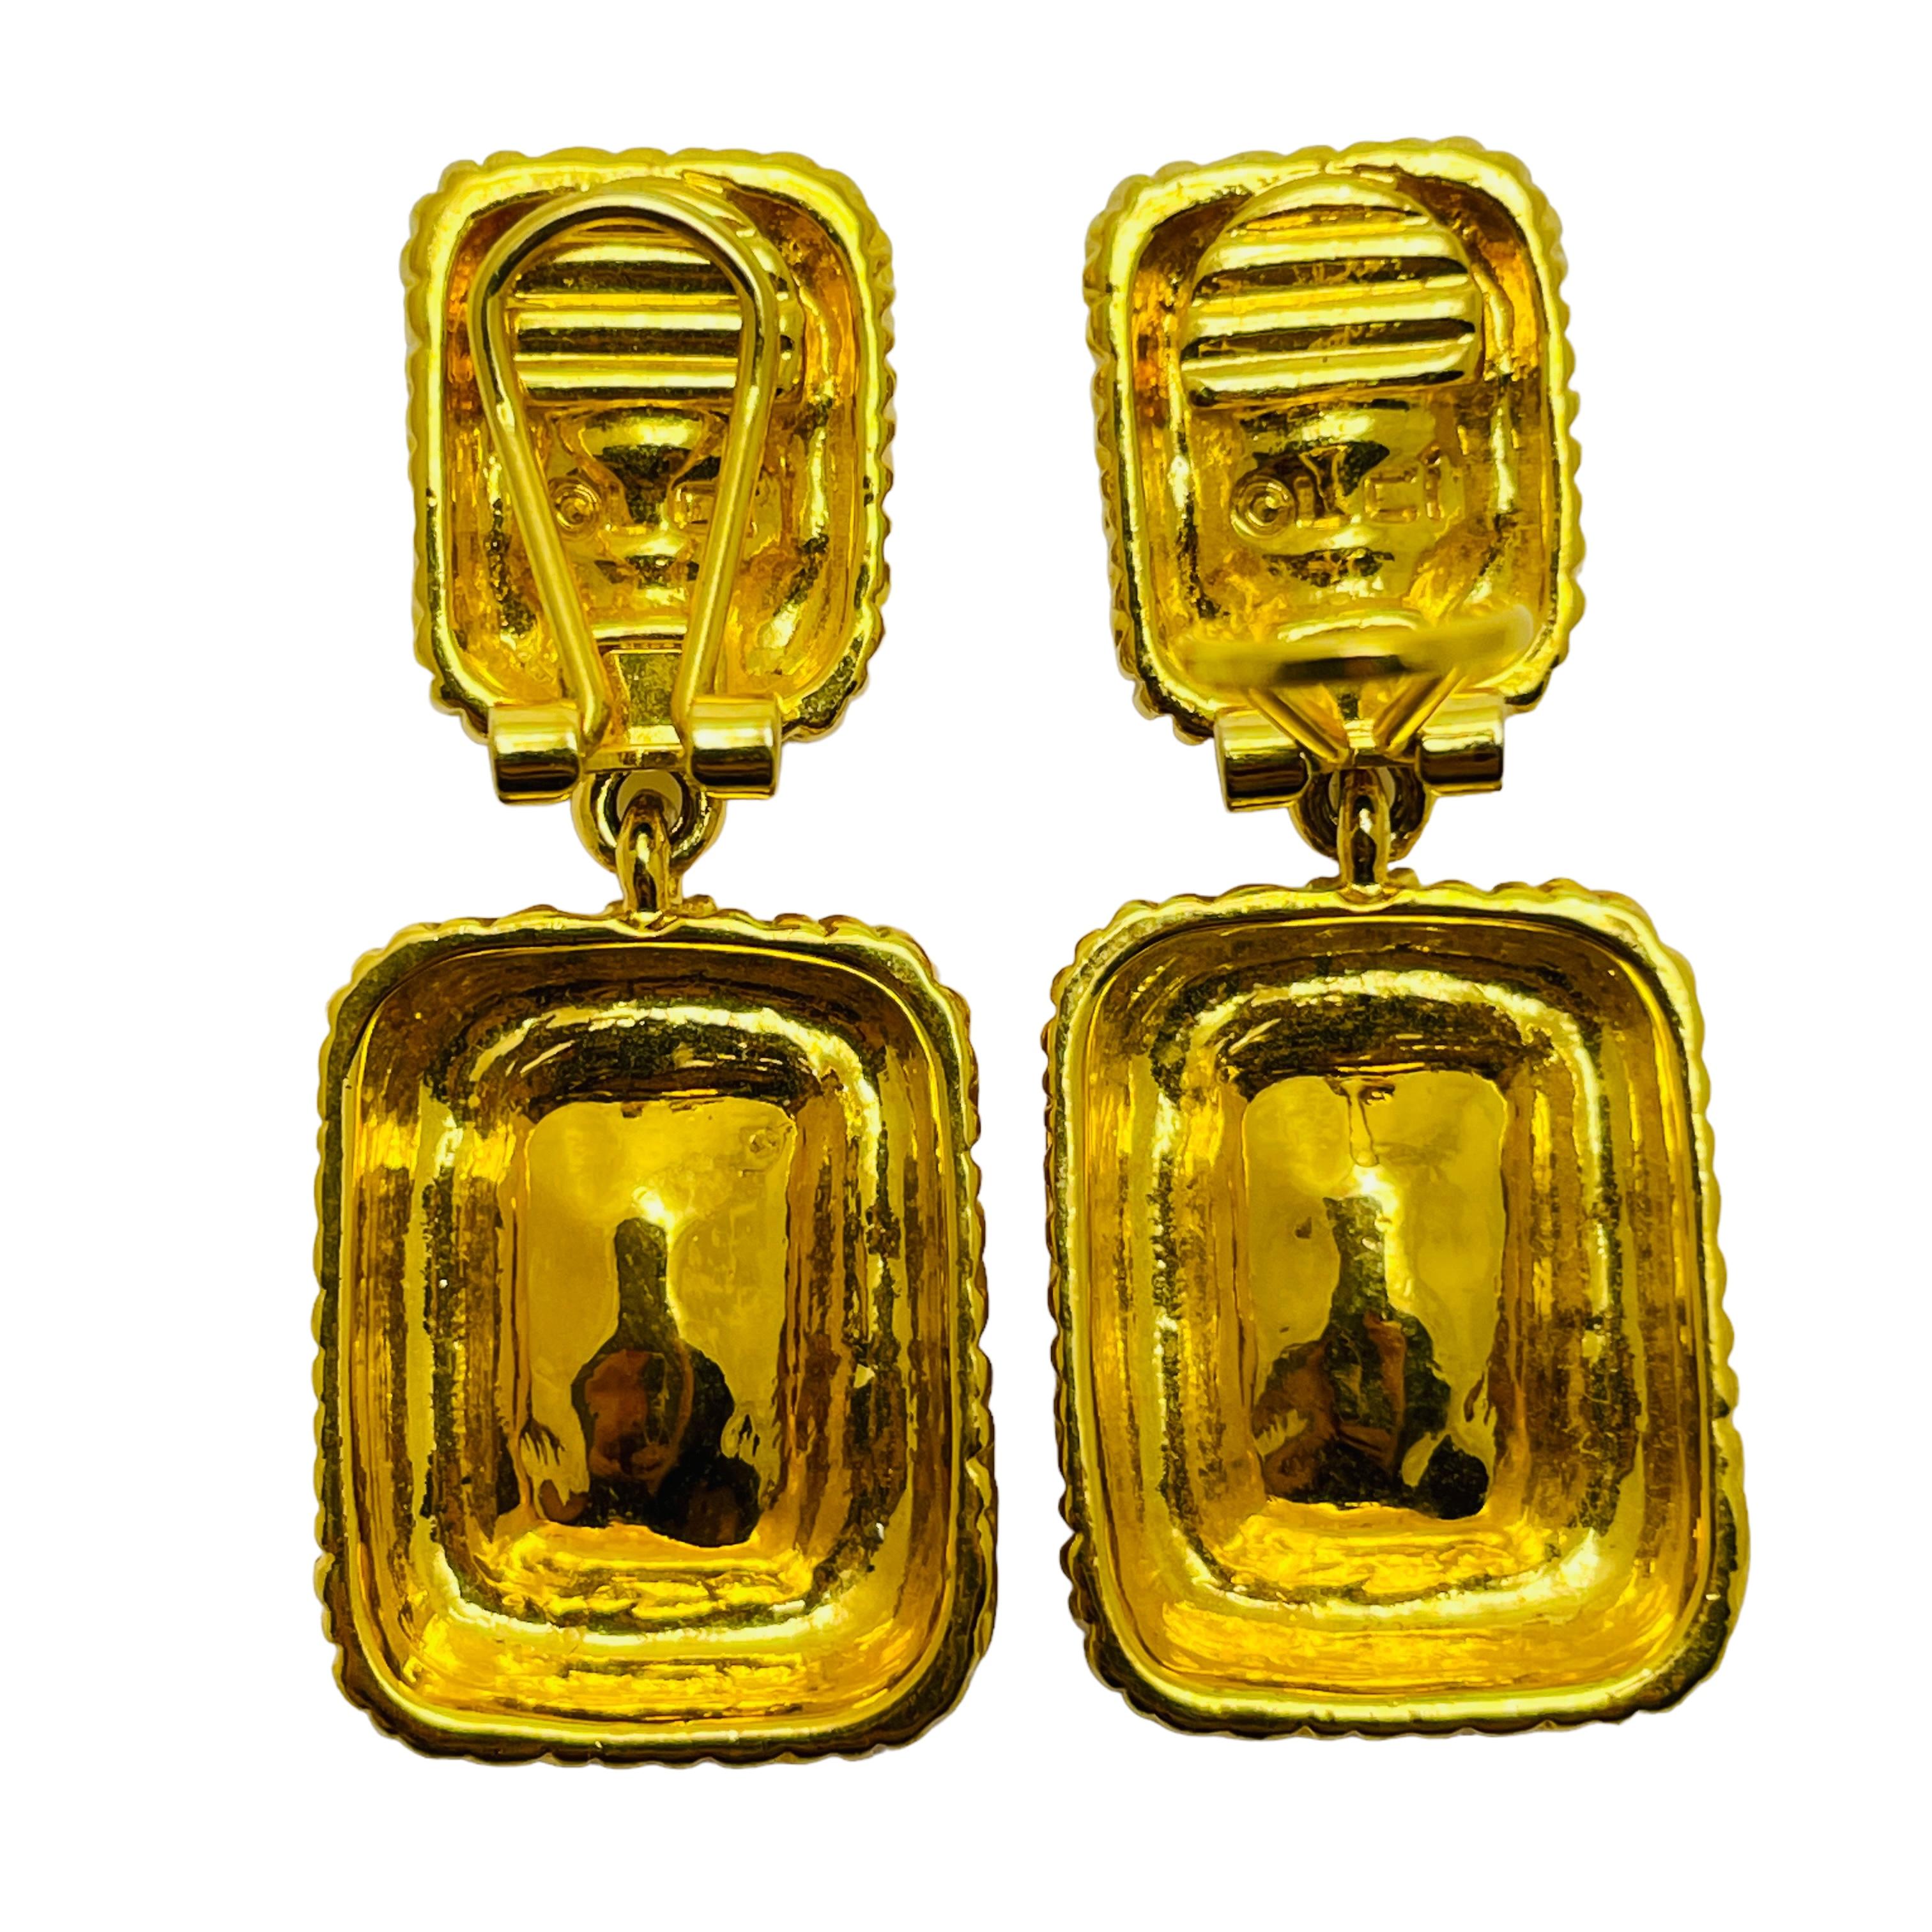 LIZ CLAIBORNE gold glass designer runway clip on earrings In Good Condition For Sale In Palos Hills, IL